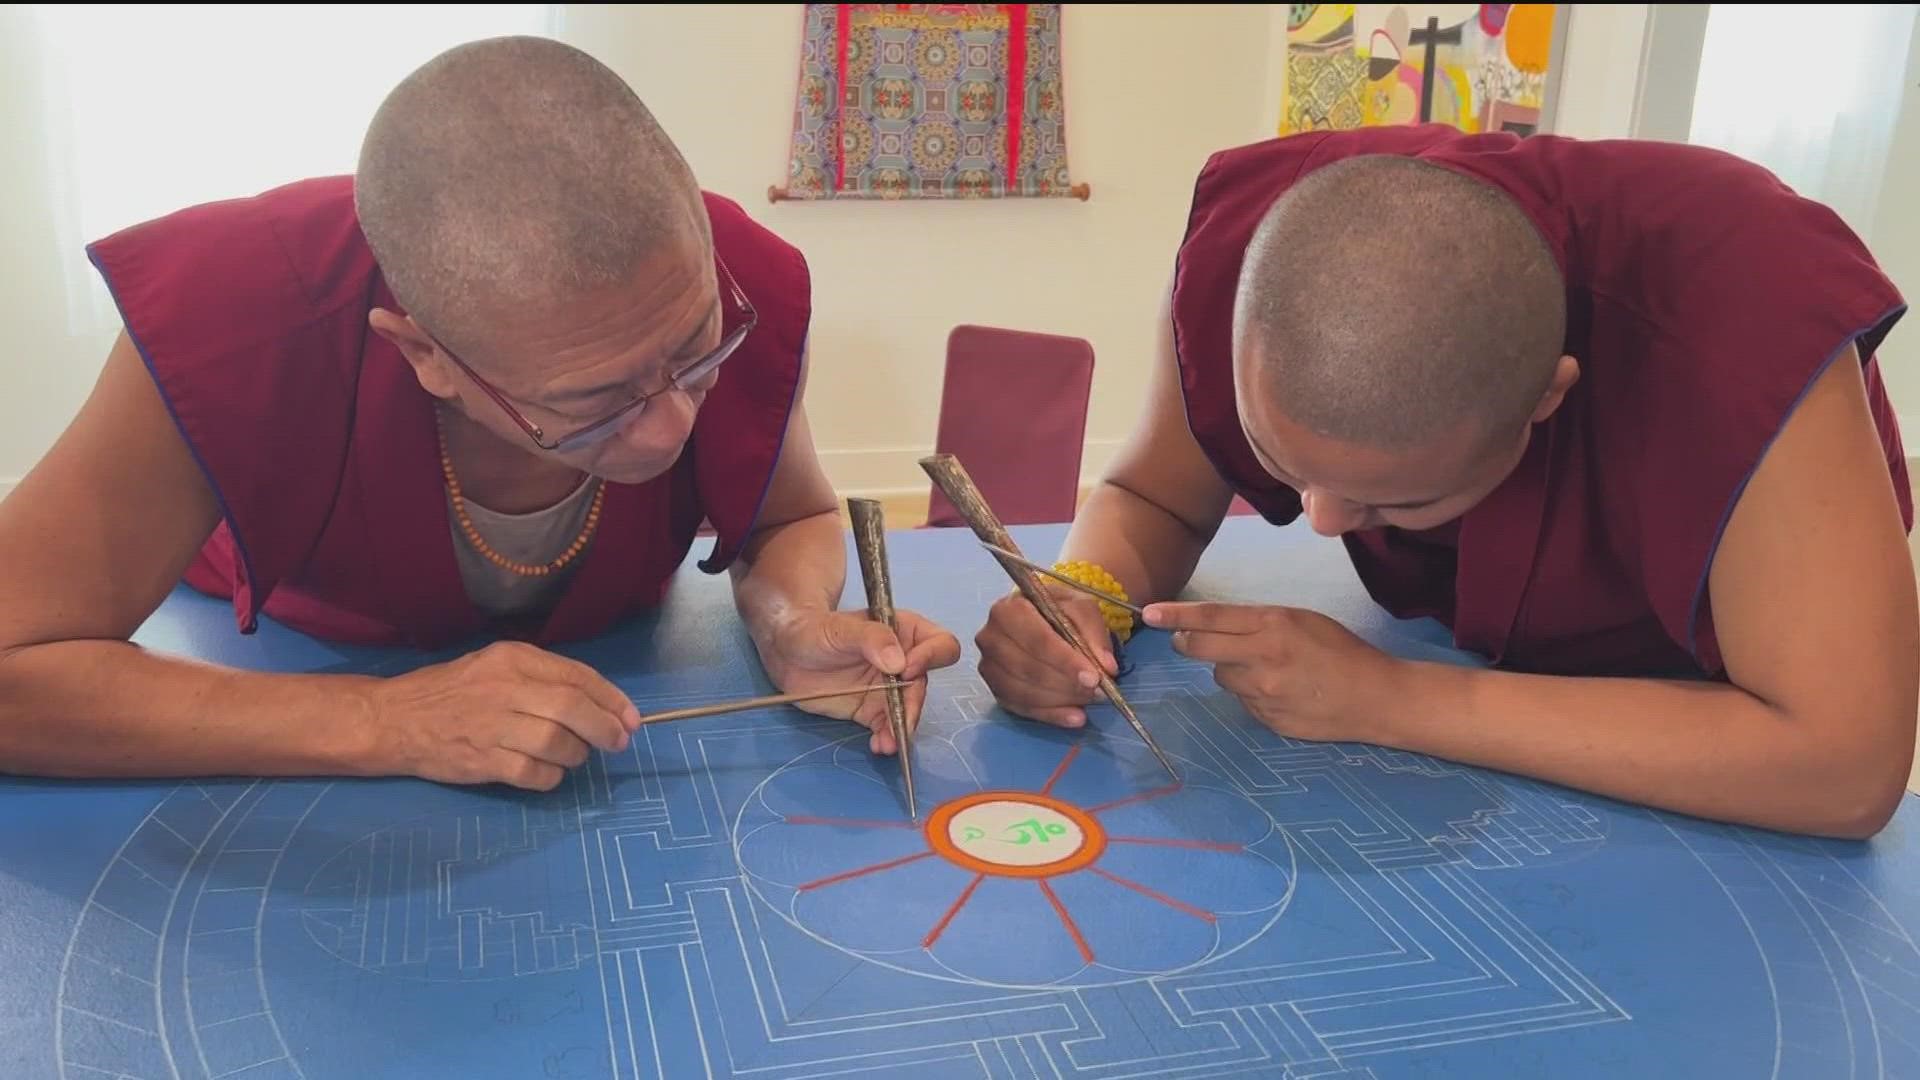 Tibetan monks from Southern India are constructing a sand mandala that will be finished this Friday that the public can see them work on all week in Carlsbad.